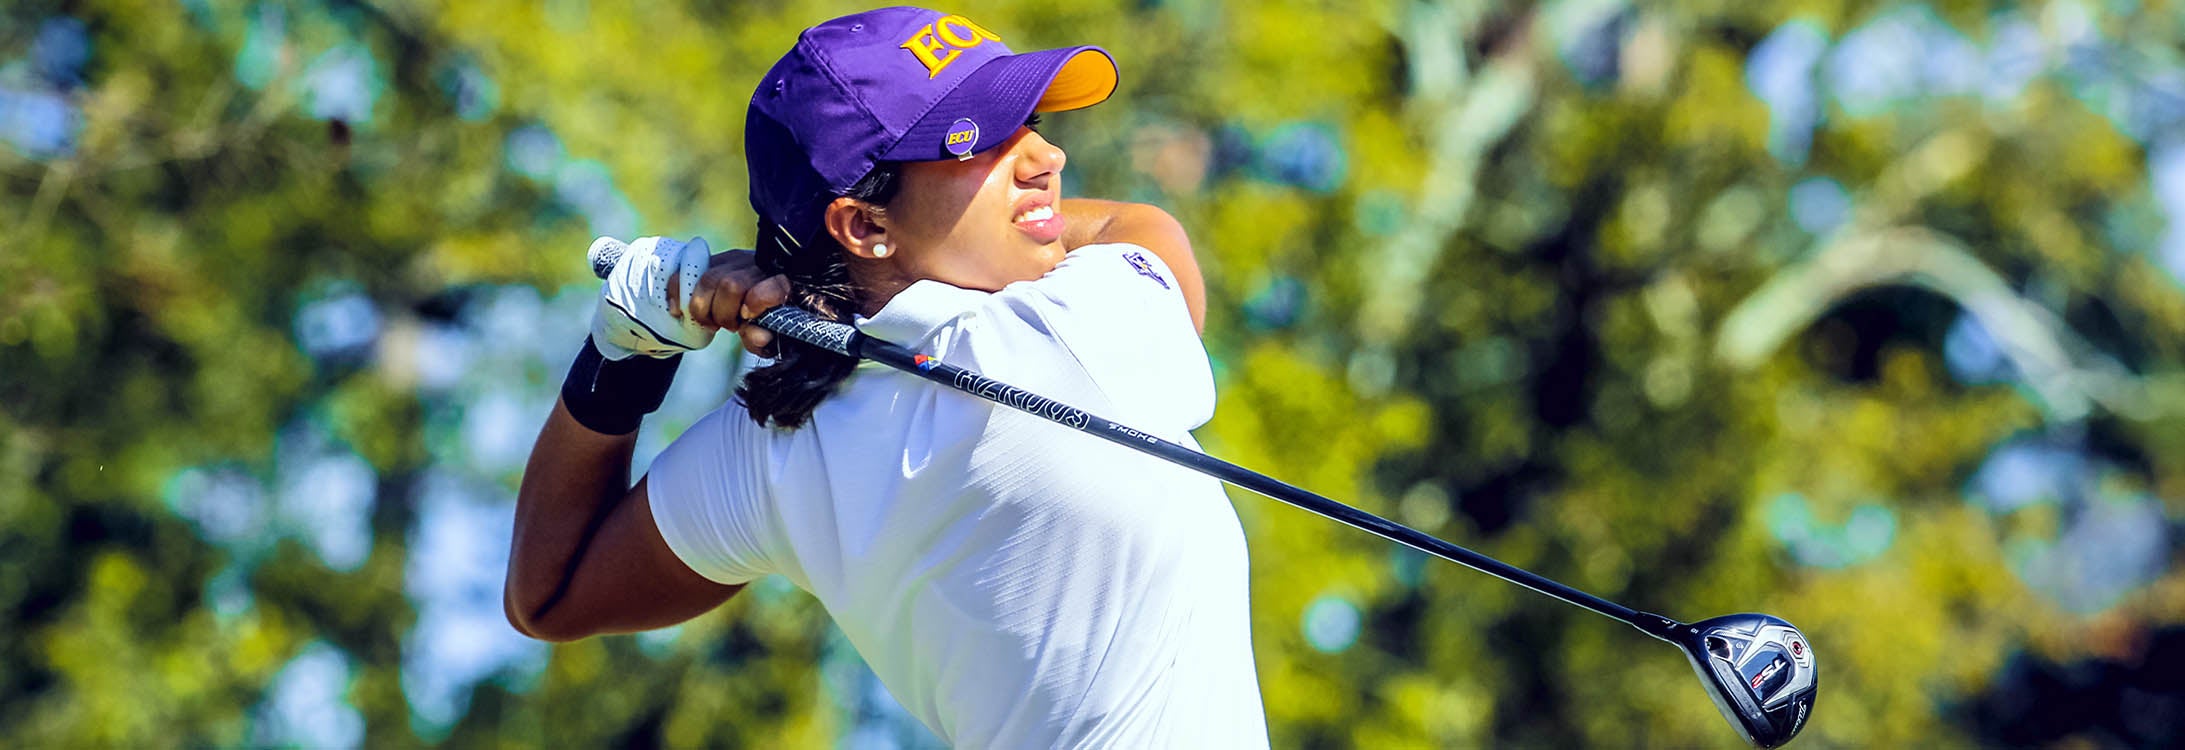 Senior Grace Yatawara has a love of engineering and golf. She is a member of the East Carolina University women’s golf team and recently won the 2019 South Asian Games. (Photos by ECU Athletic Media Relations)